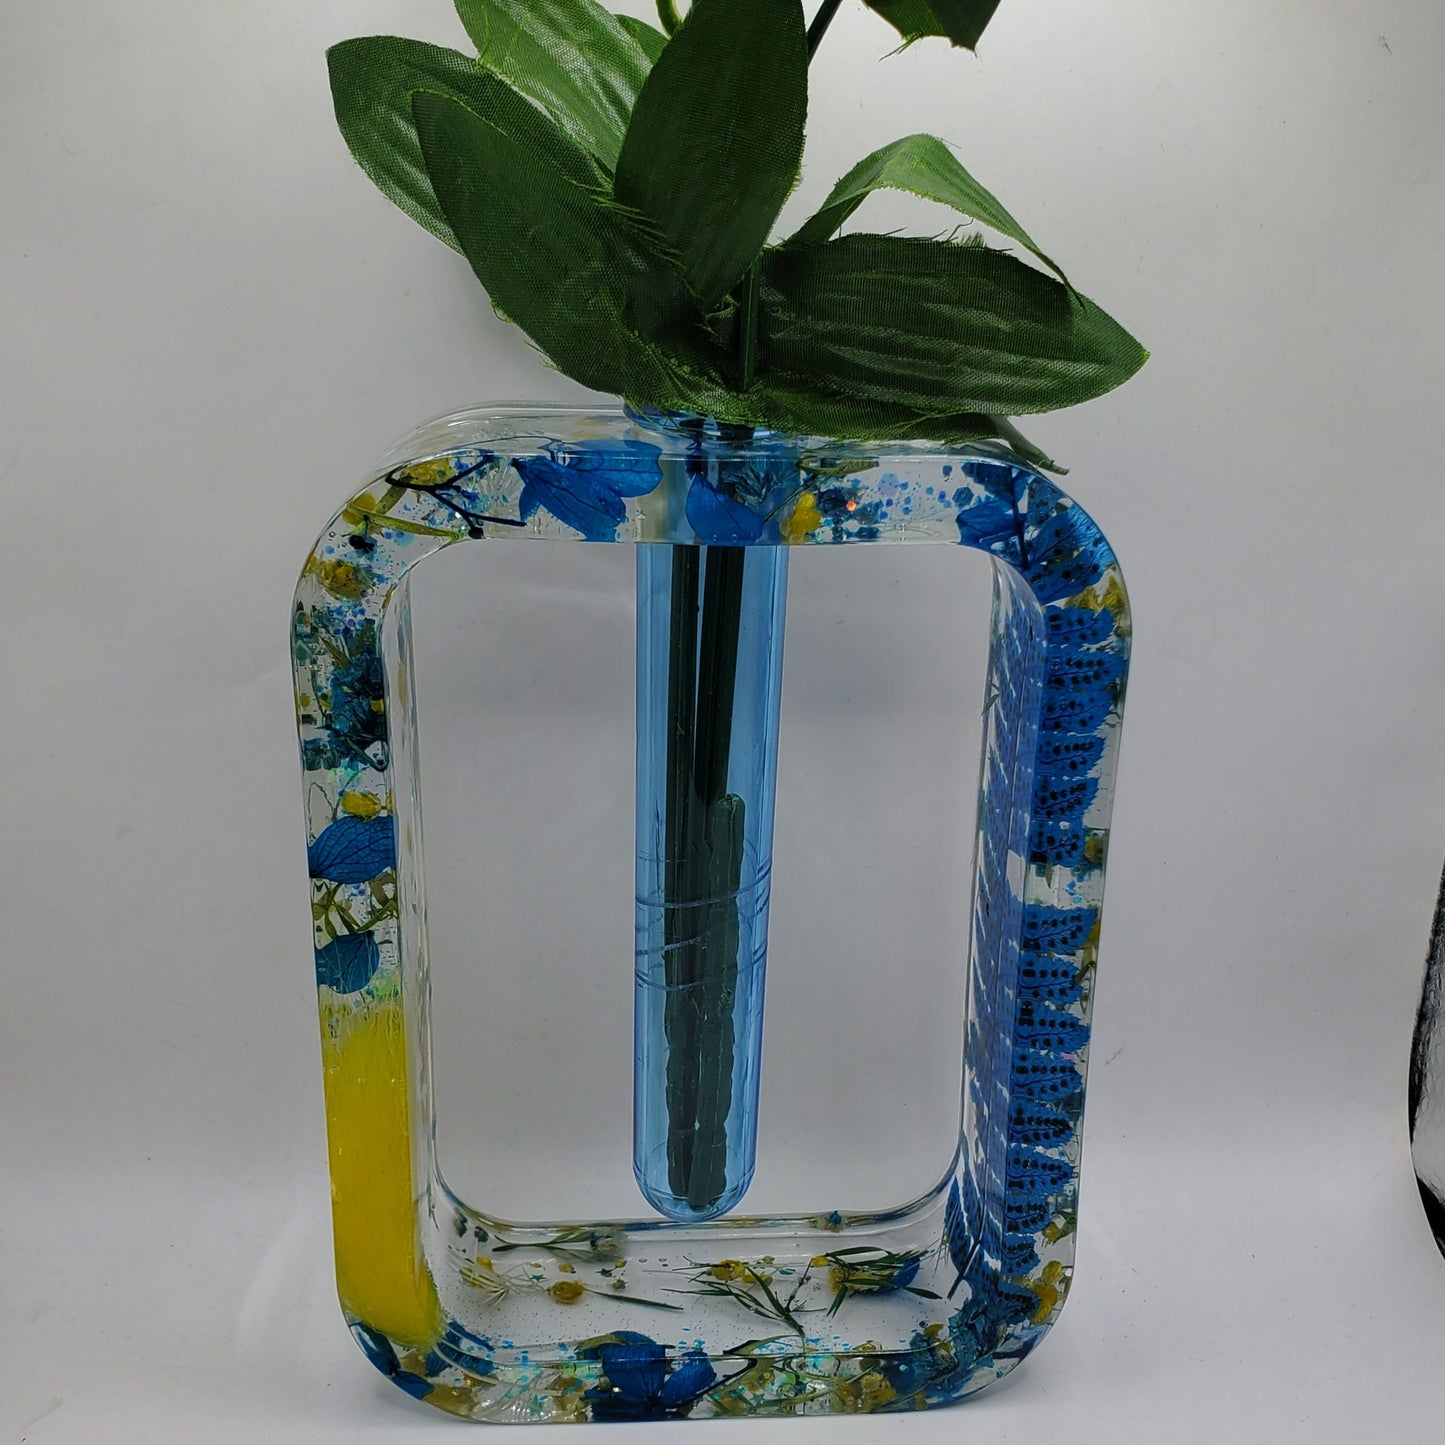 A lovely blue flower vase - perfect for adding a pop of color to any room!